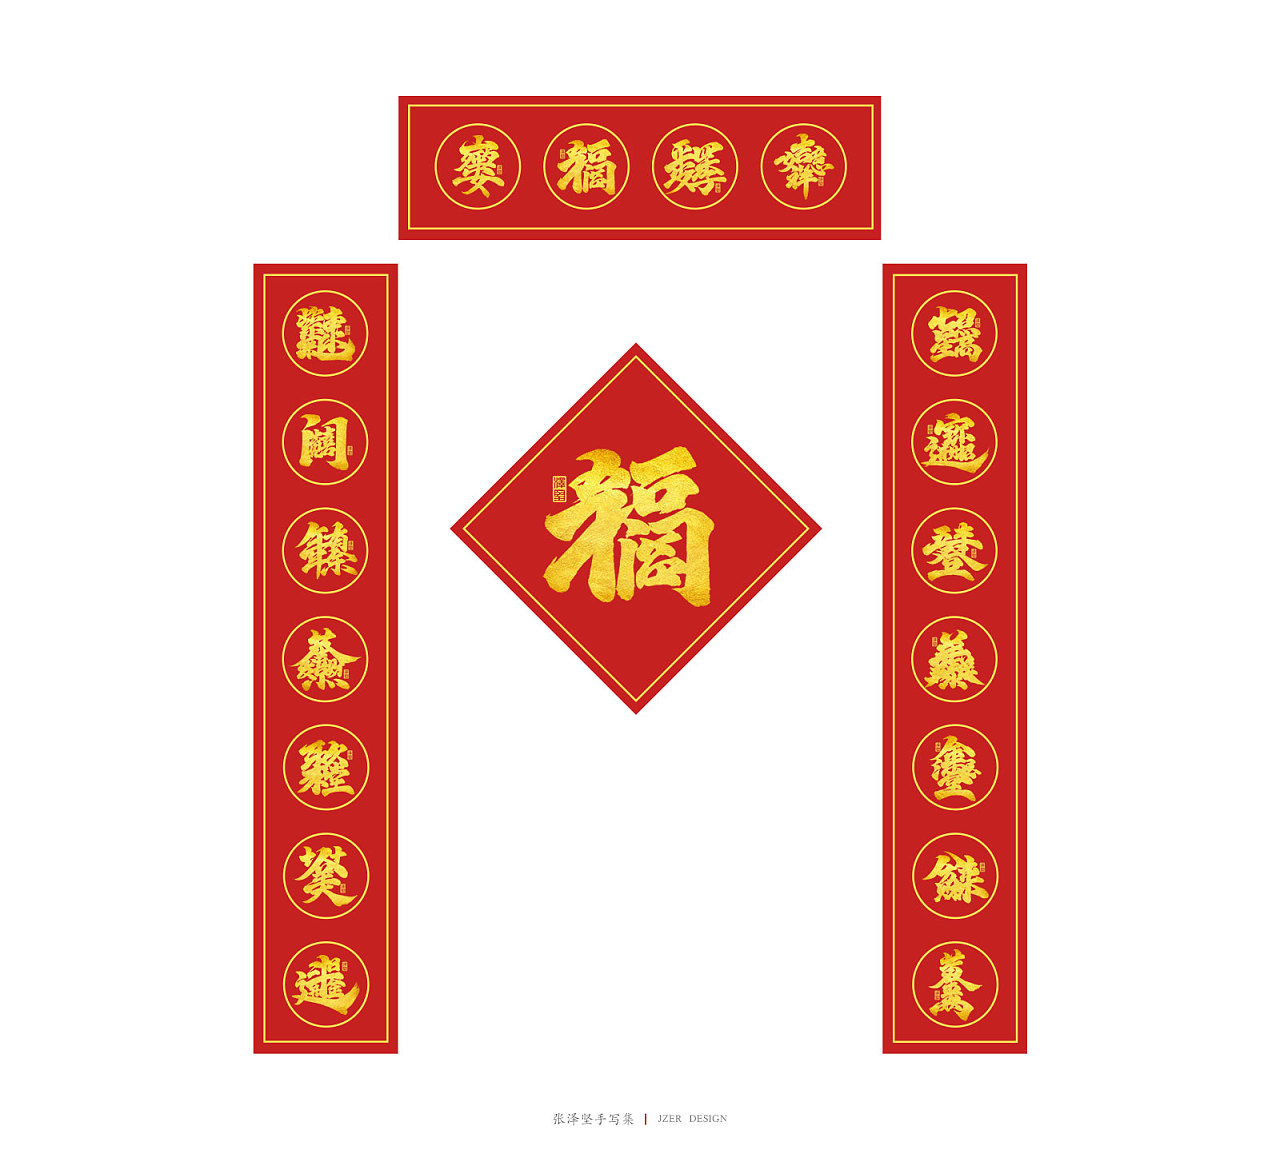 When the Chinese New Year blessing fonts are combined, let's see what it will look like together